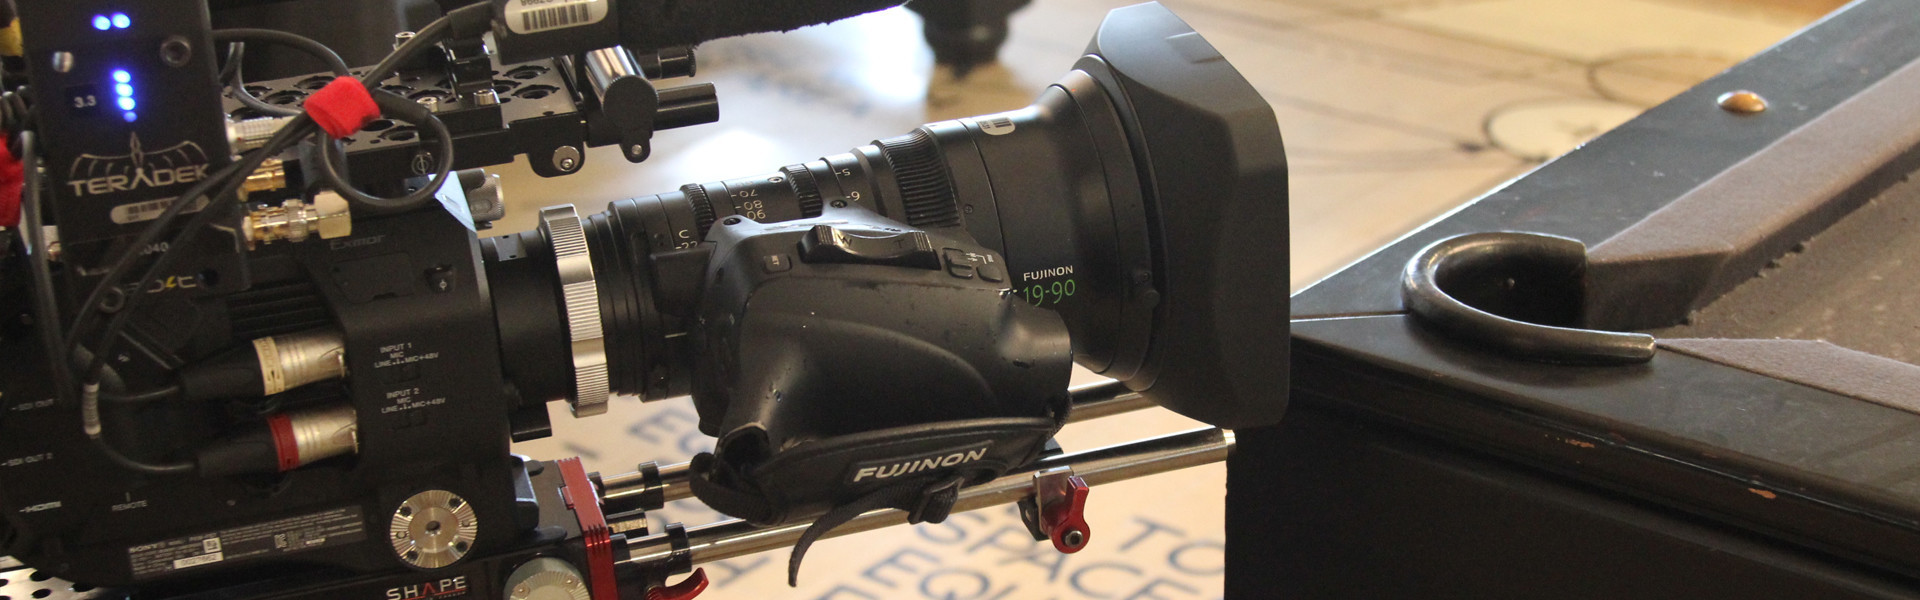 Header image for article Behind the Lens: Fujinon Cabrio 19-90mm Zoom